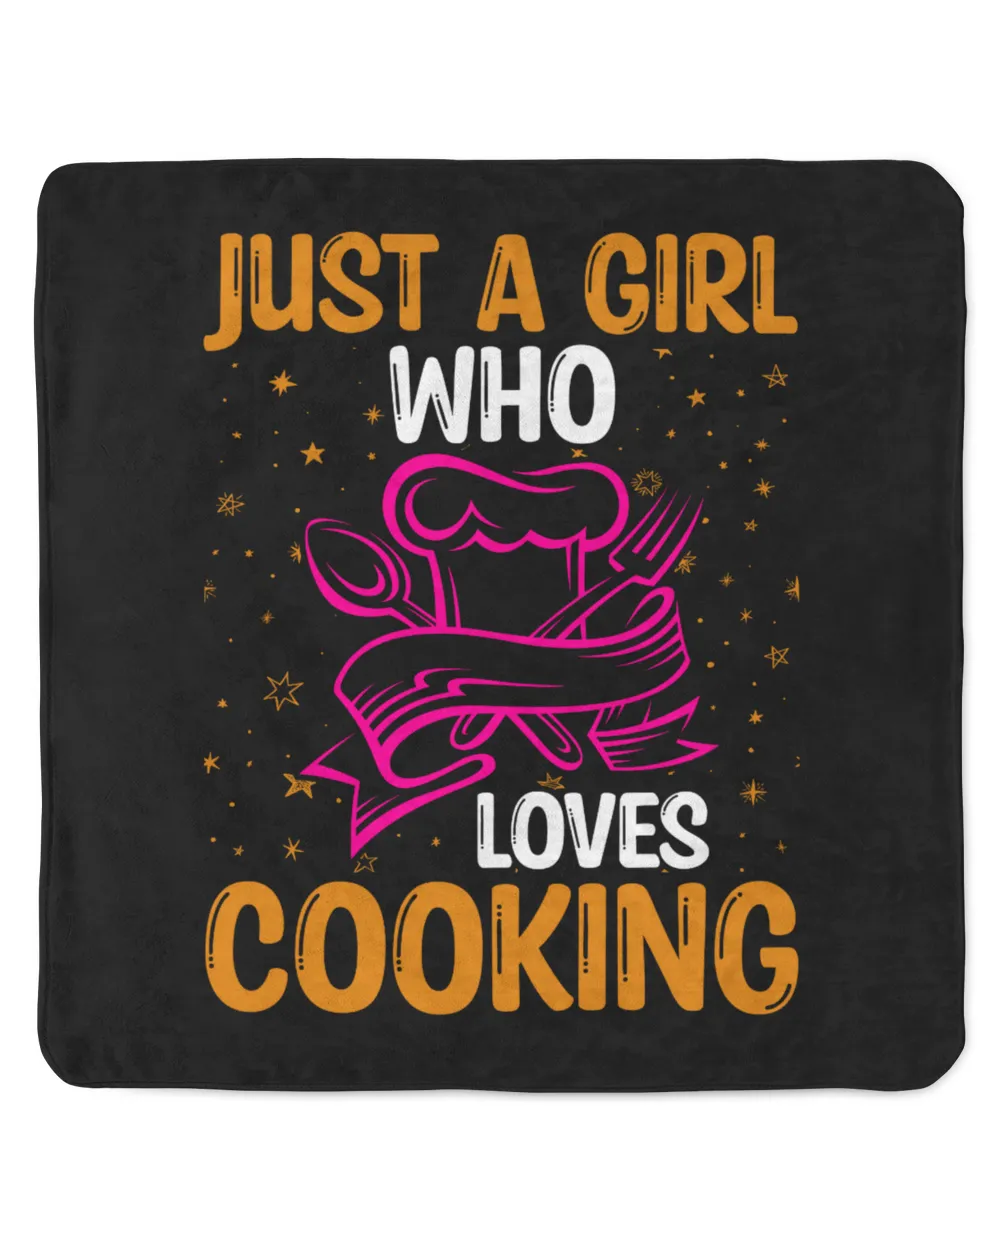 Just a Girl Who Loves Cooking